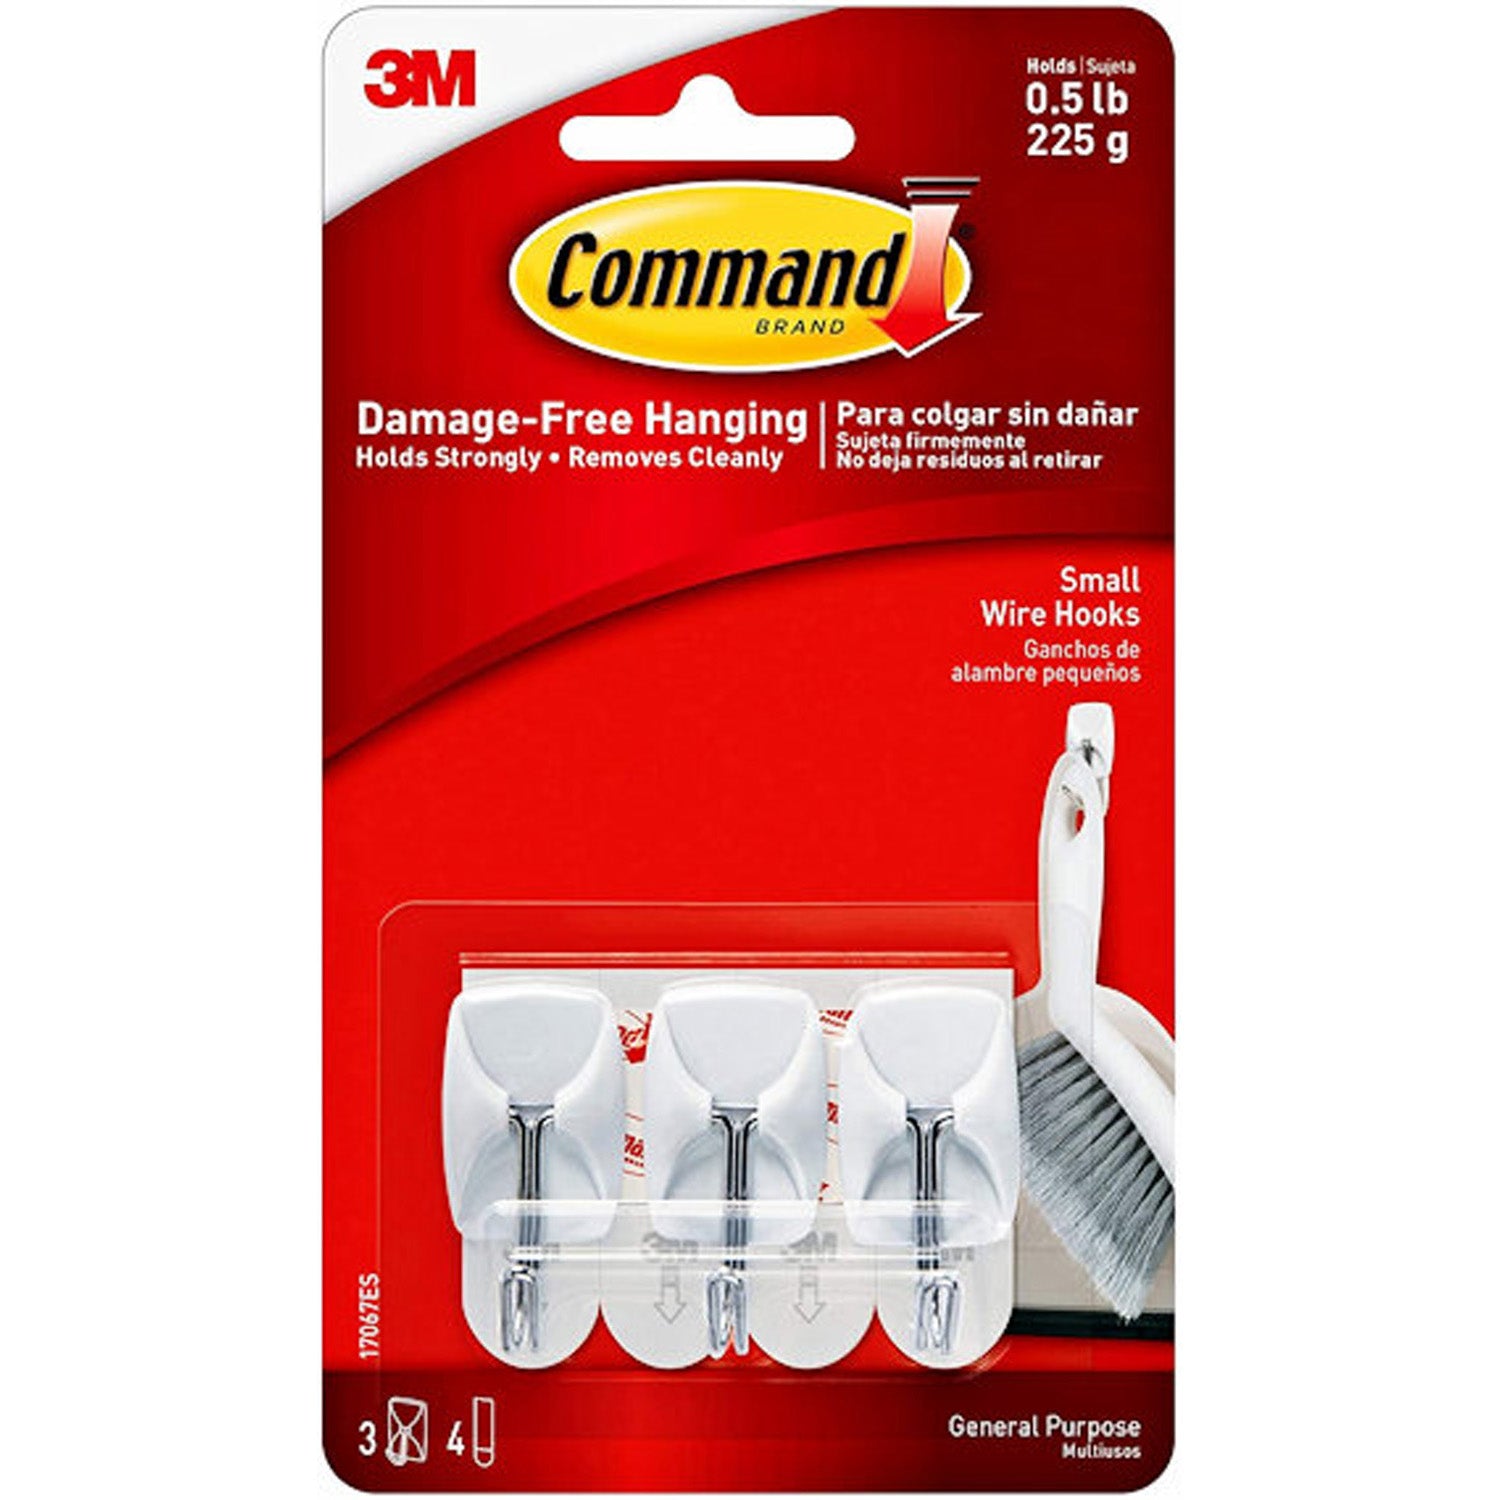 3-M Company - 17067-9es - Sml Wire Hooks 9pk. (Pack of 4)